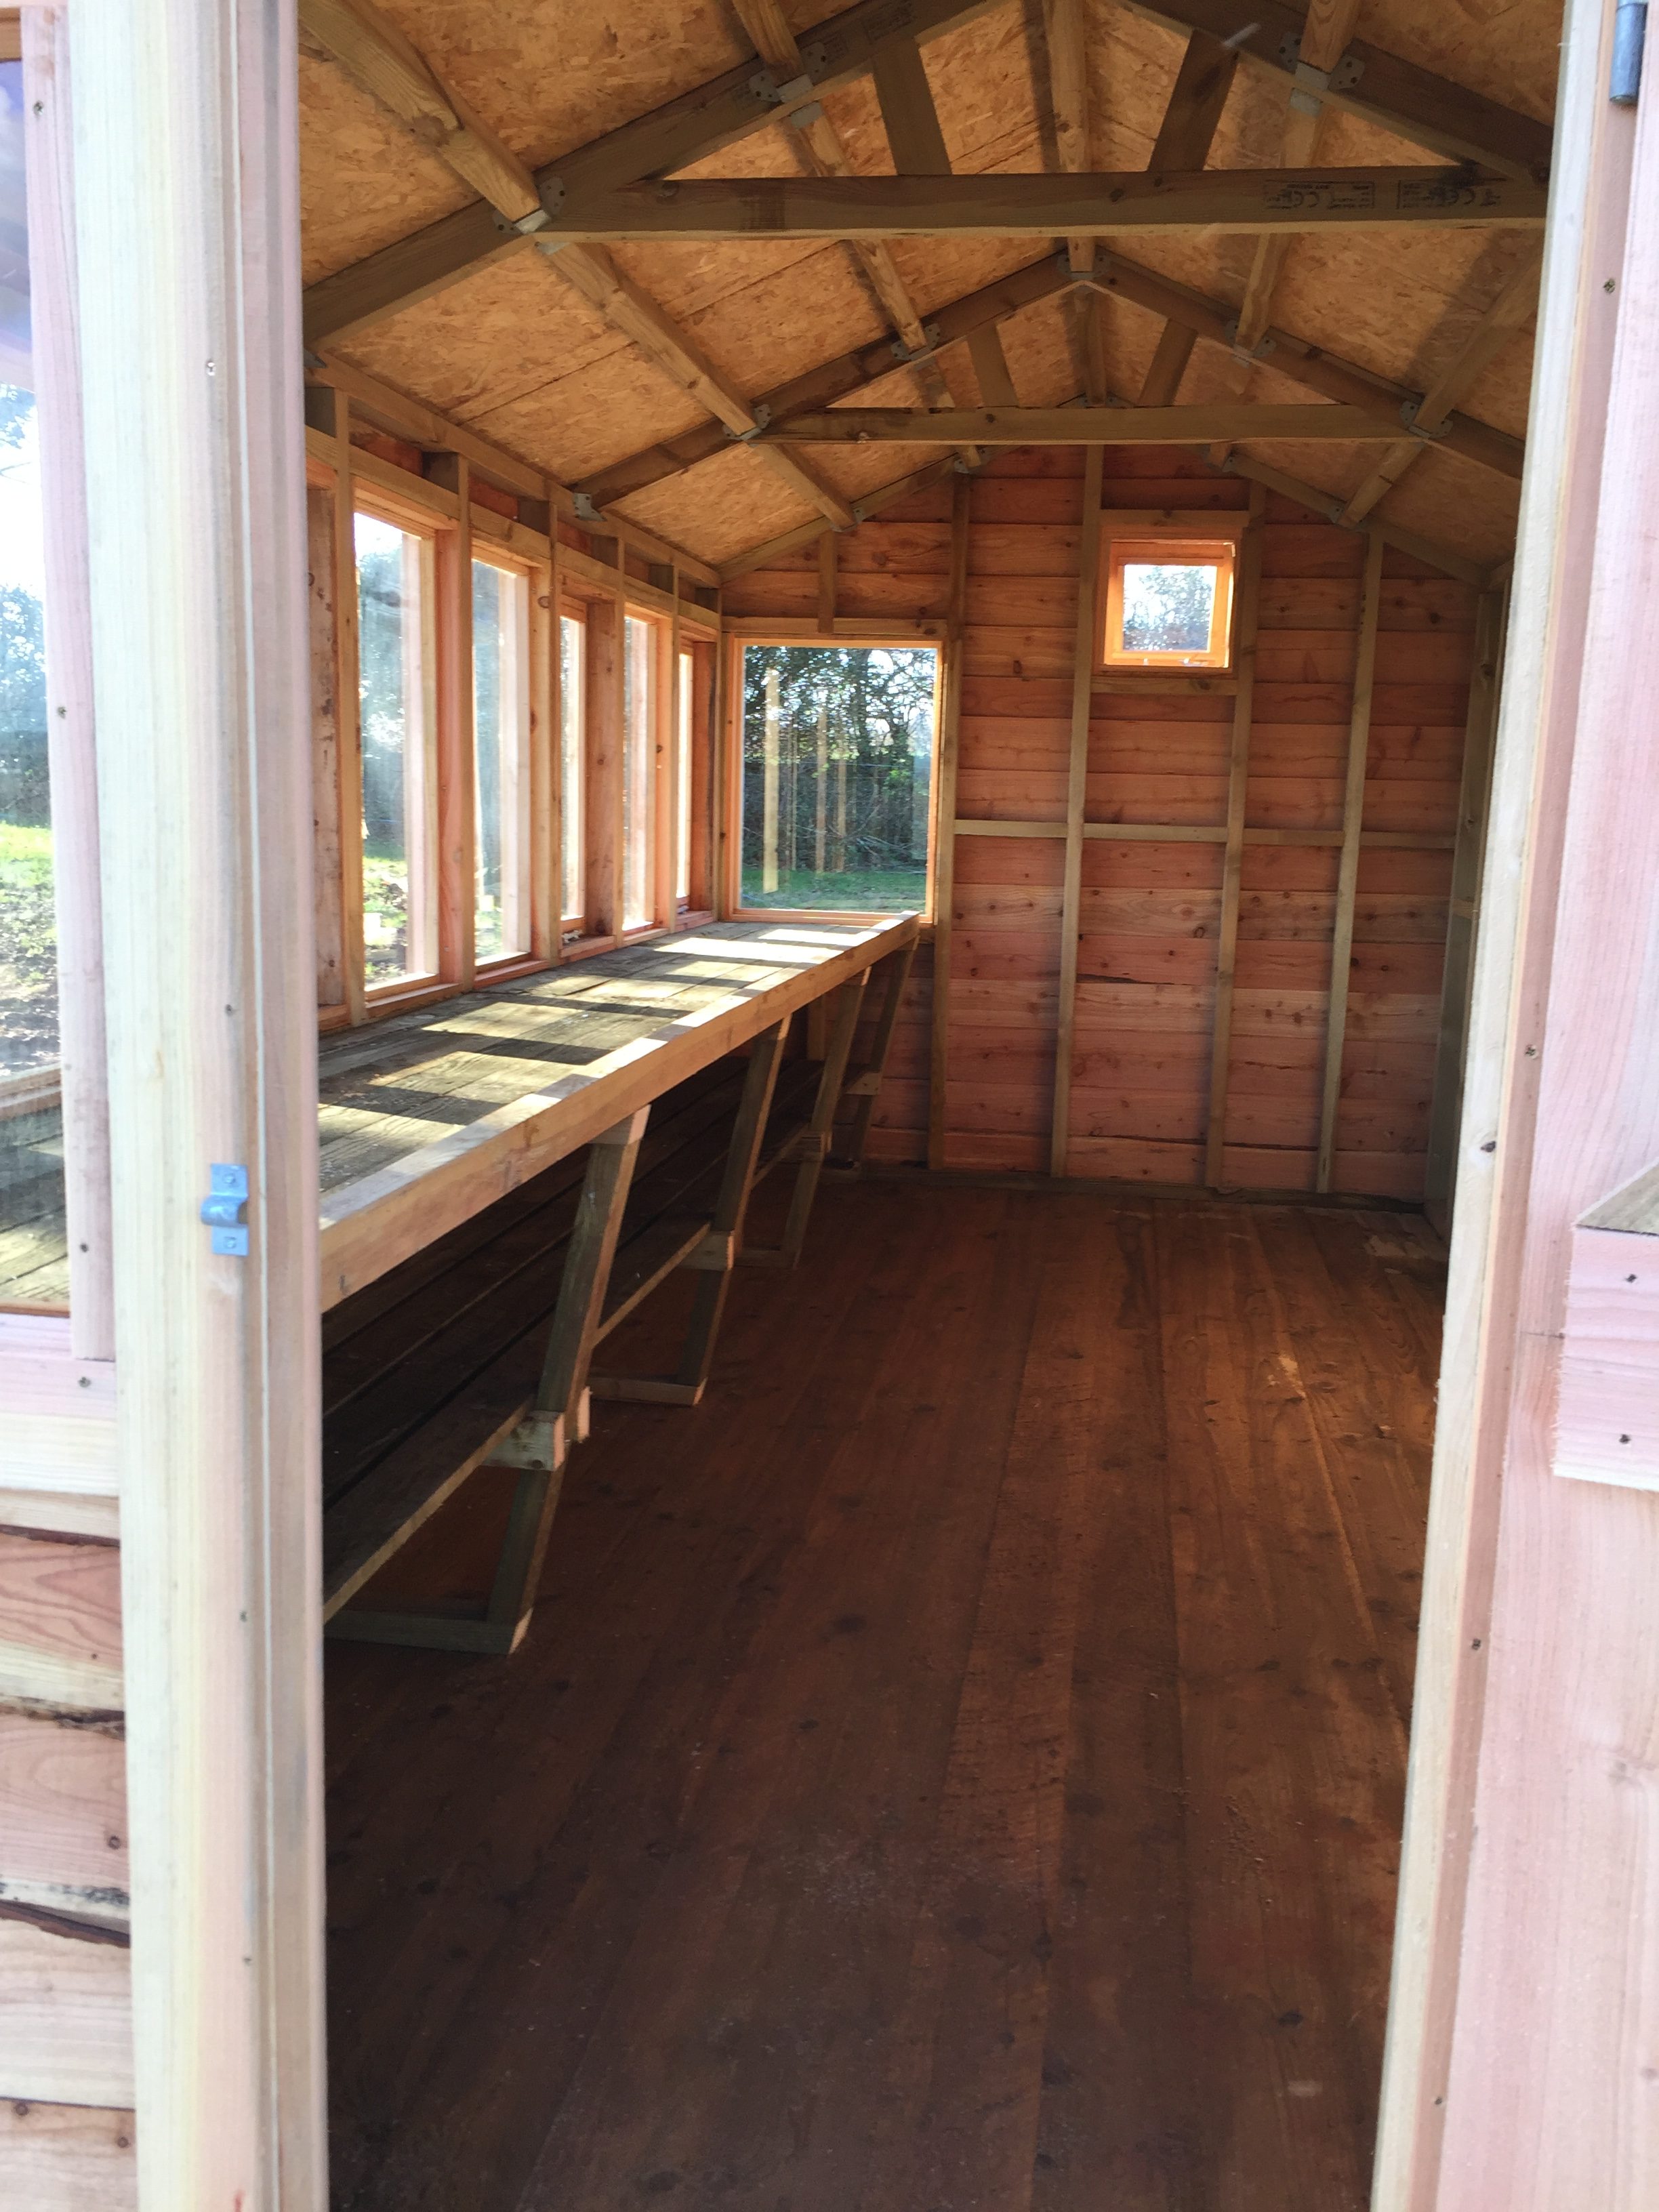 workbenches in our cedar shingle potting shed